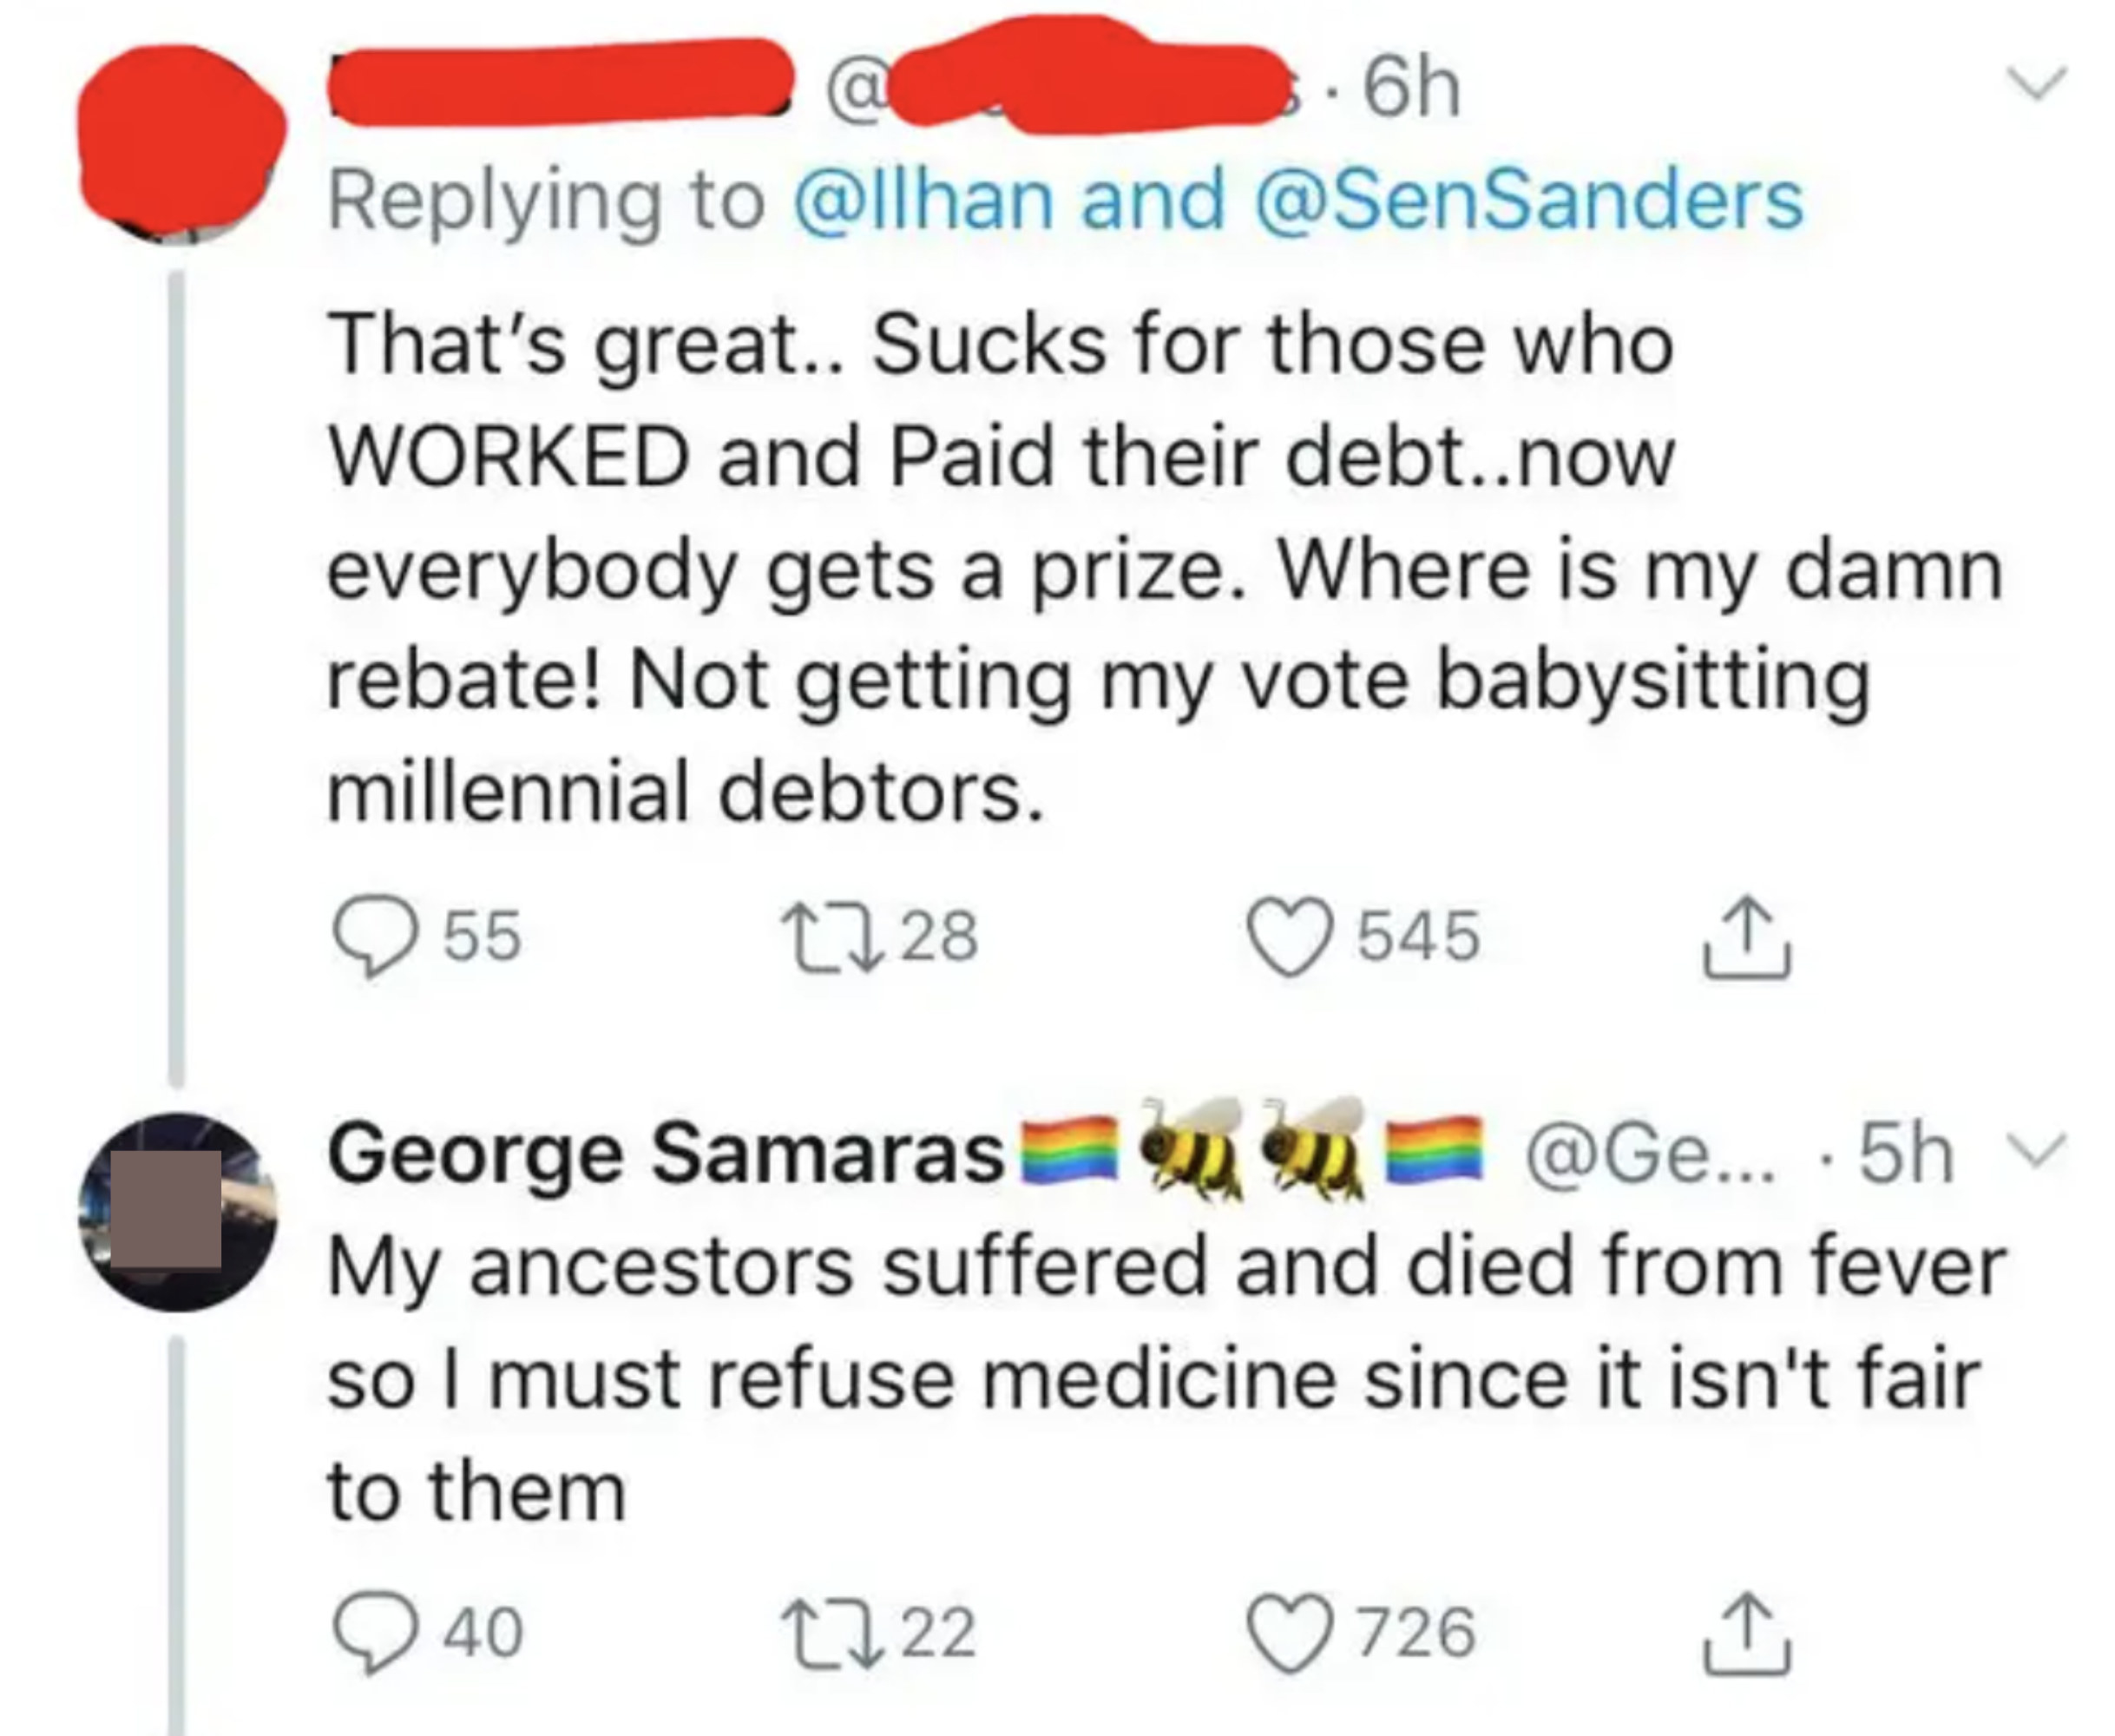 boomer saying people should have to work and pay debt and someone says my ancestors suffered and died so i must refuse medicine since it isnt fair to them